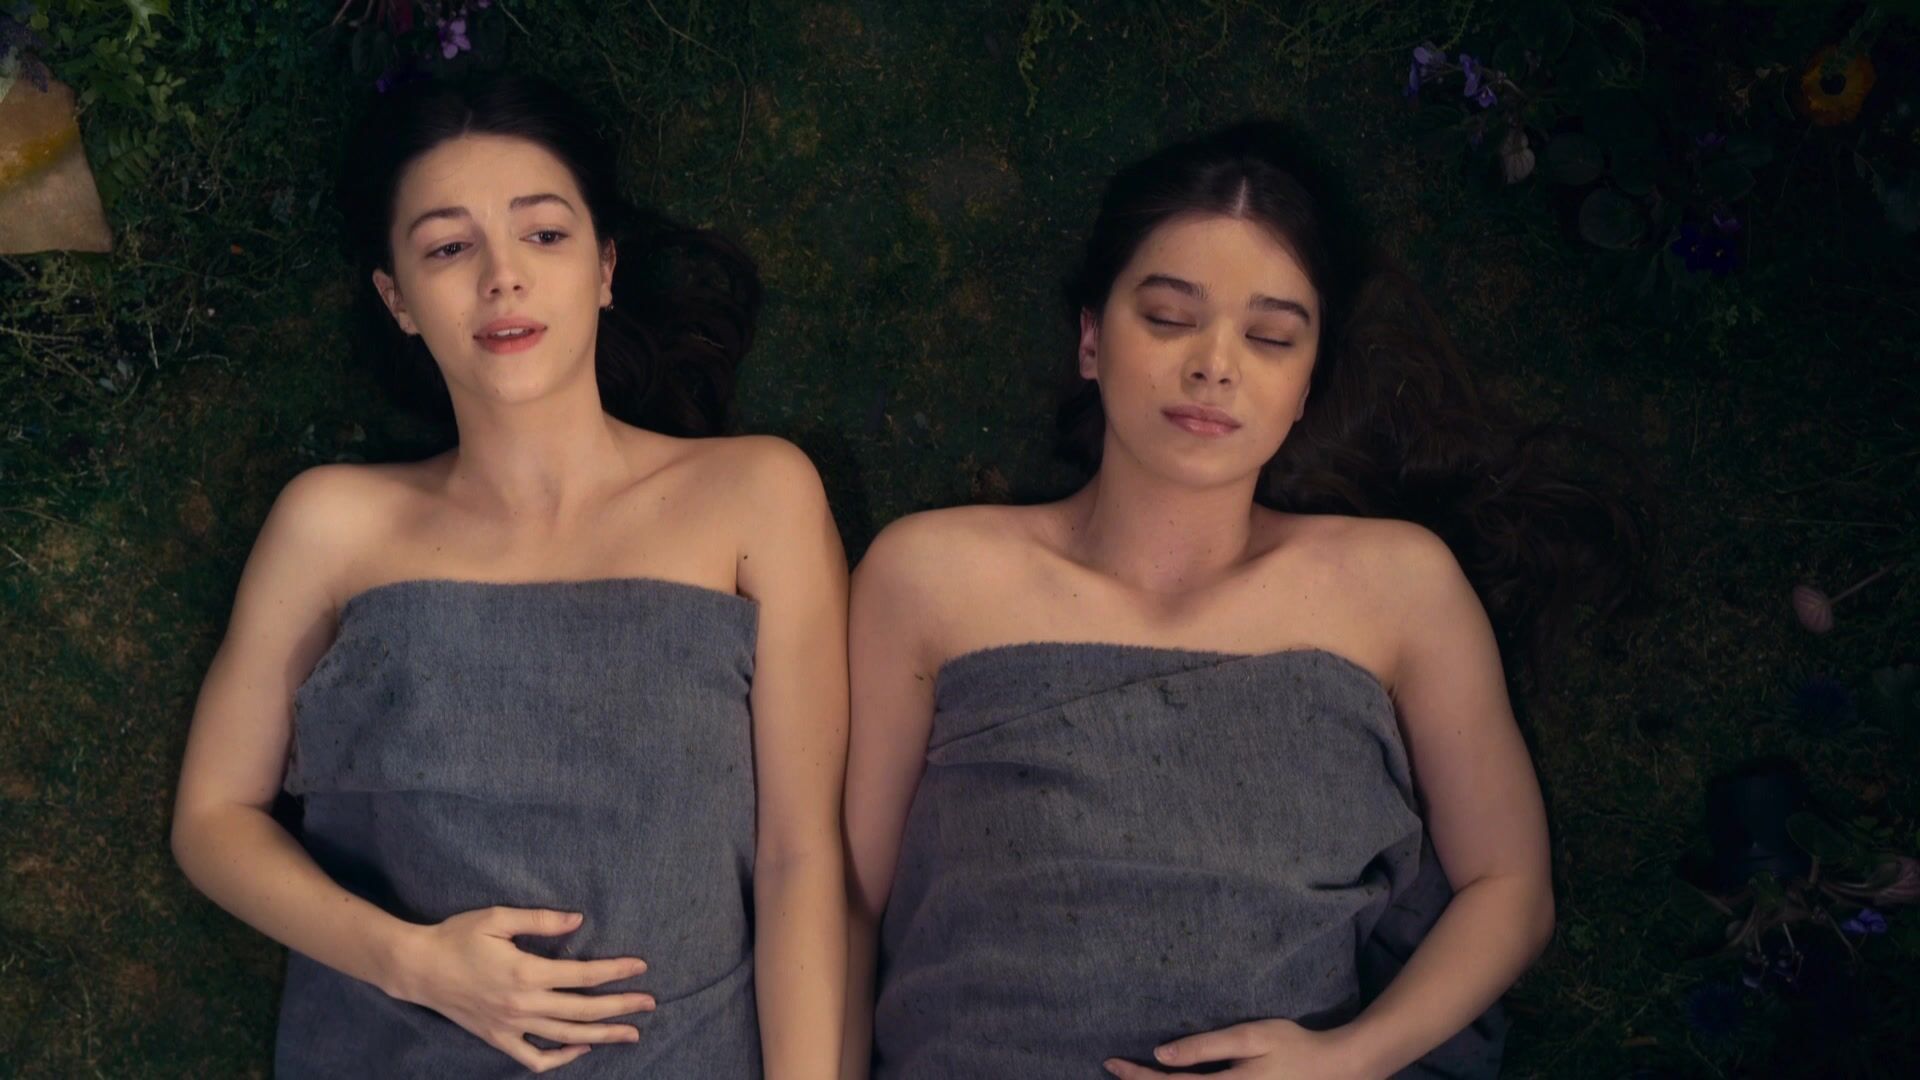 Chick Hailee Steinfeld's sexy lesbian scenes from Dickinson s02e10 (2021) Grosso - 1